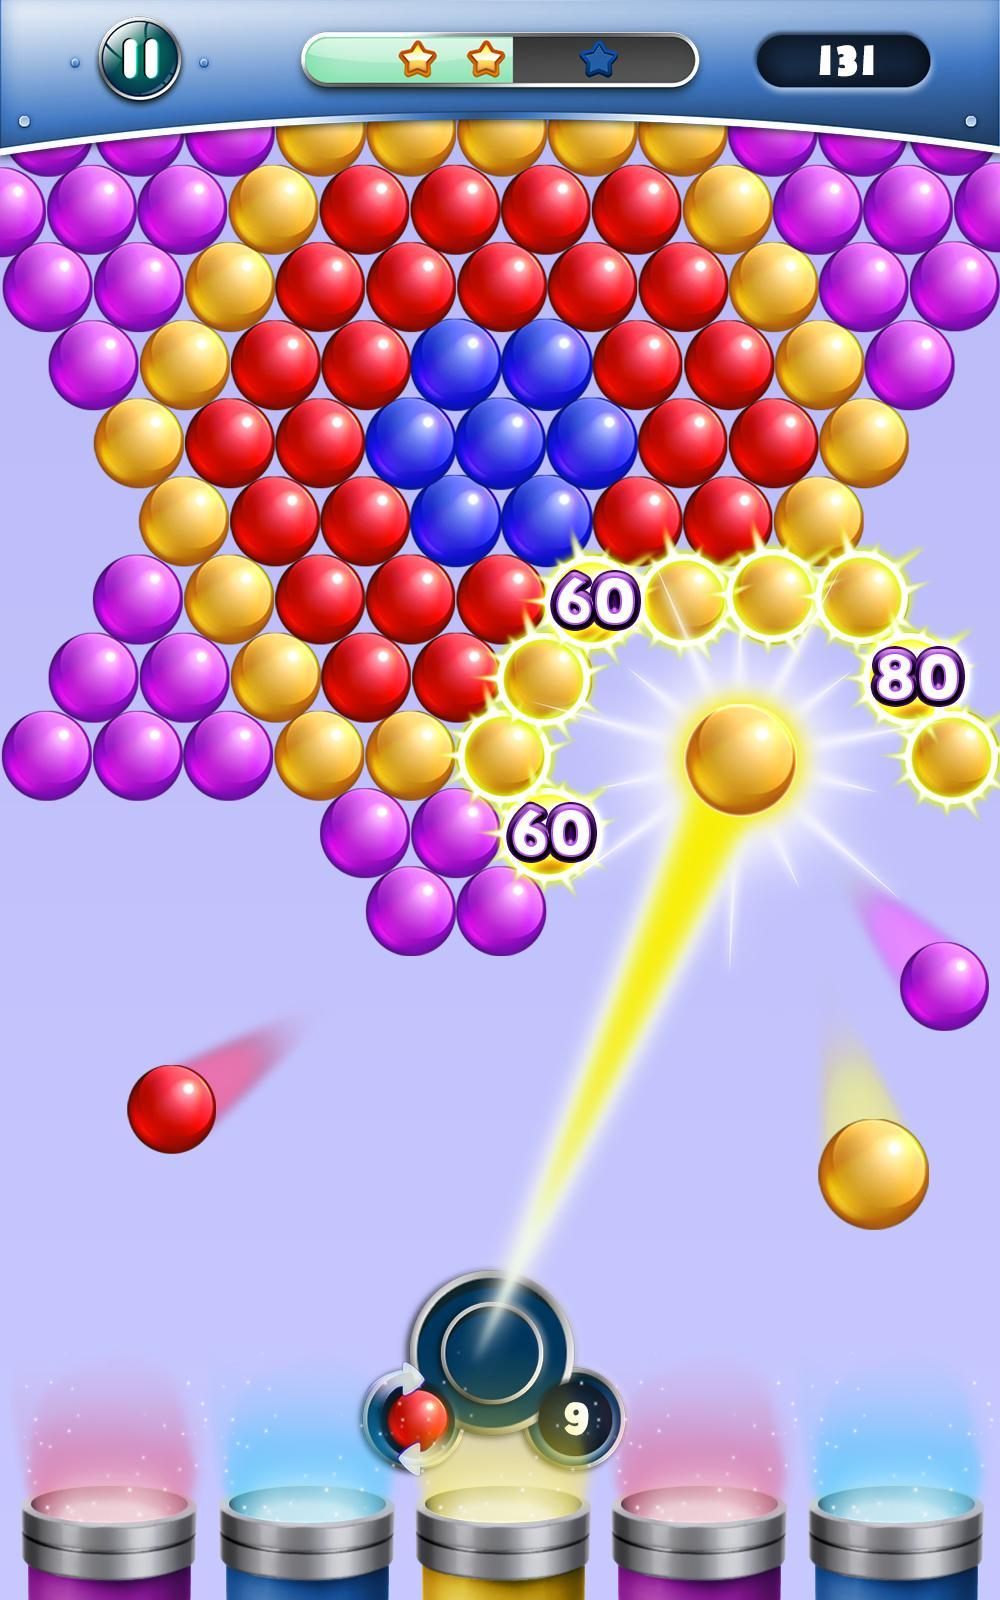 bubble shooter flash game